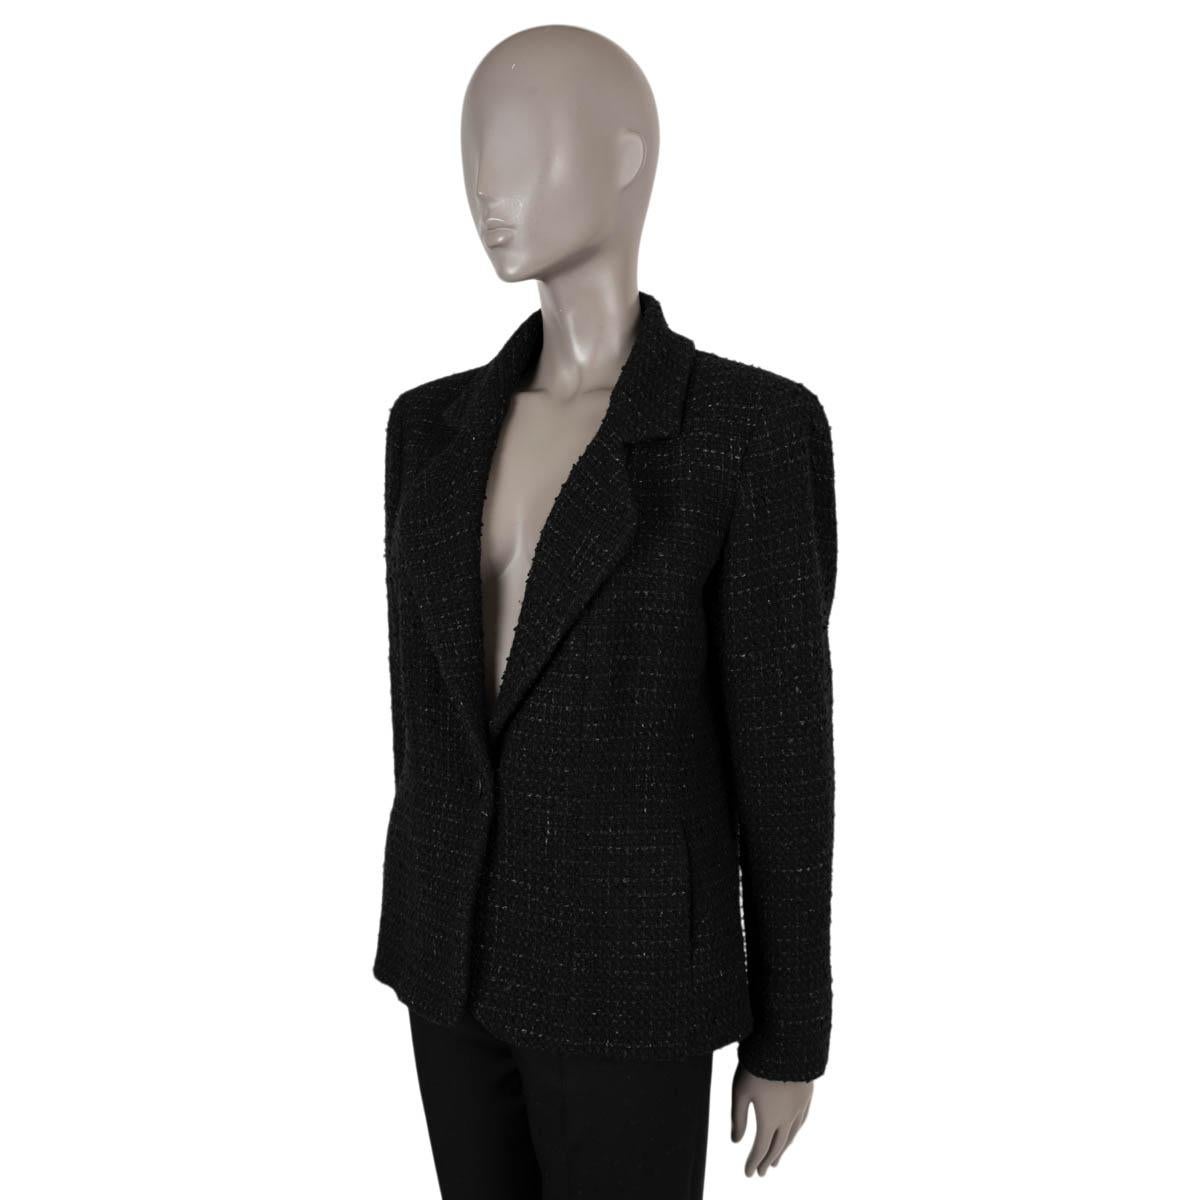 100% authentic Chanel classic one-button tweed jacket in black melange wool (86%), polyamide (10%) and polyester (4%). The design features one CC front button, two buttons on each cuff and two slit pockets on the side. Lined in black silk (100%).